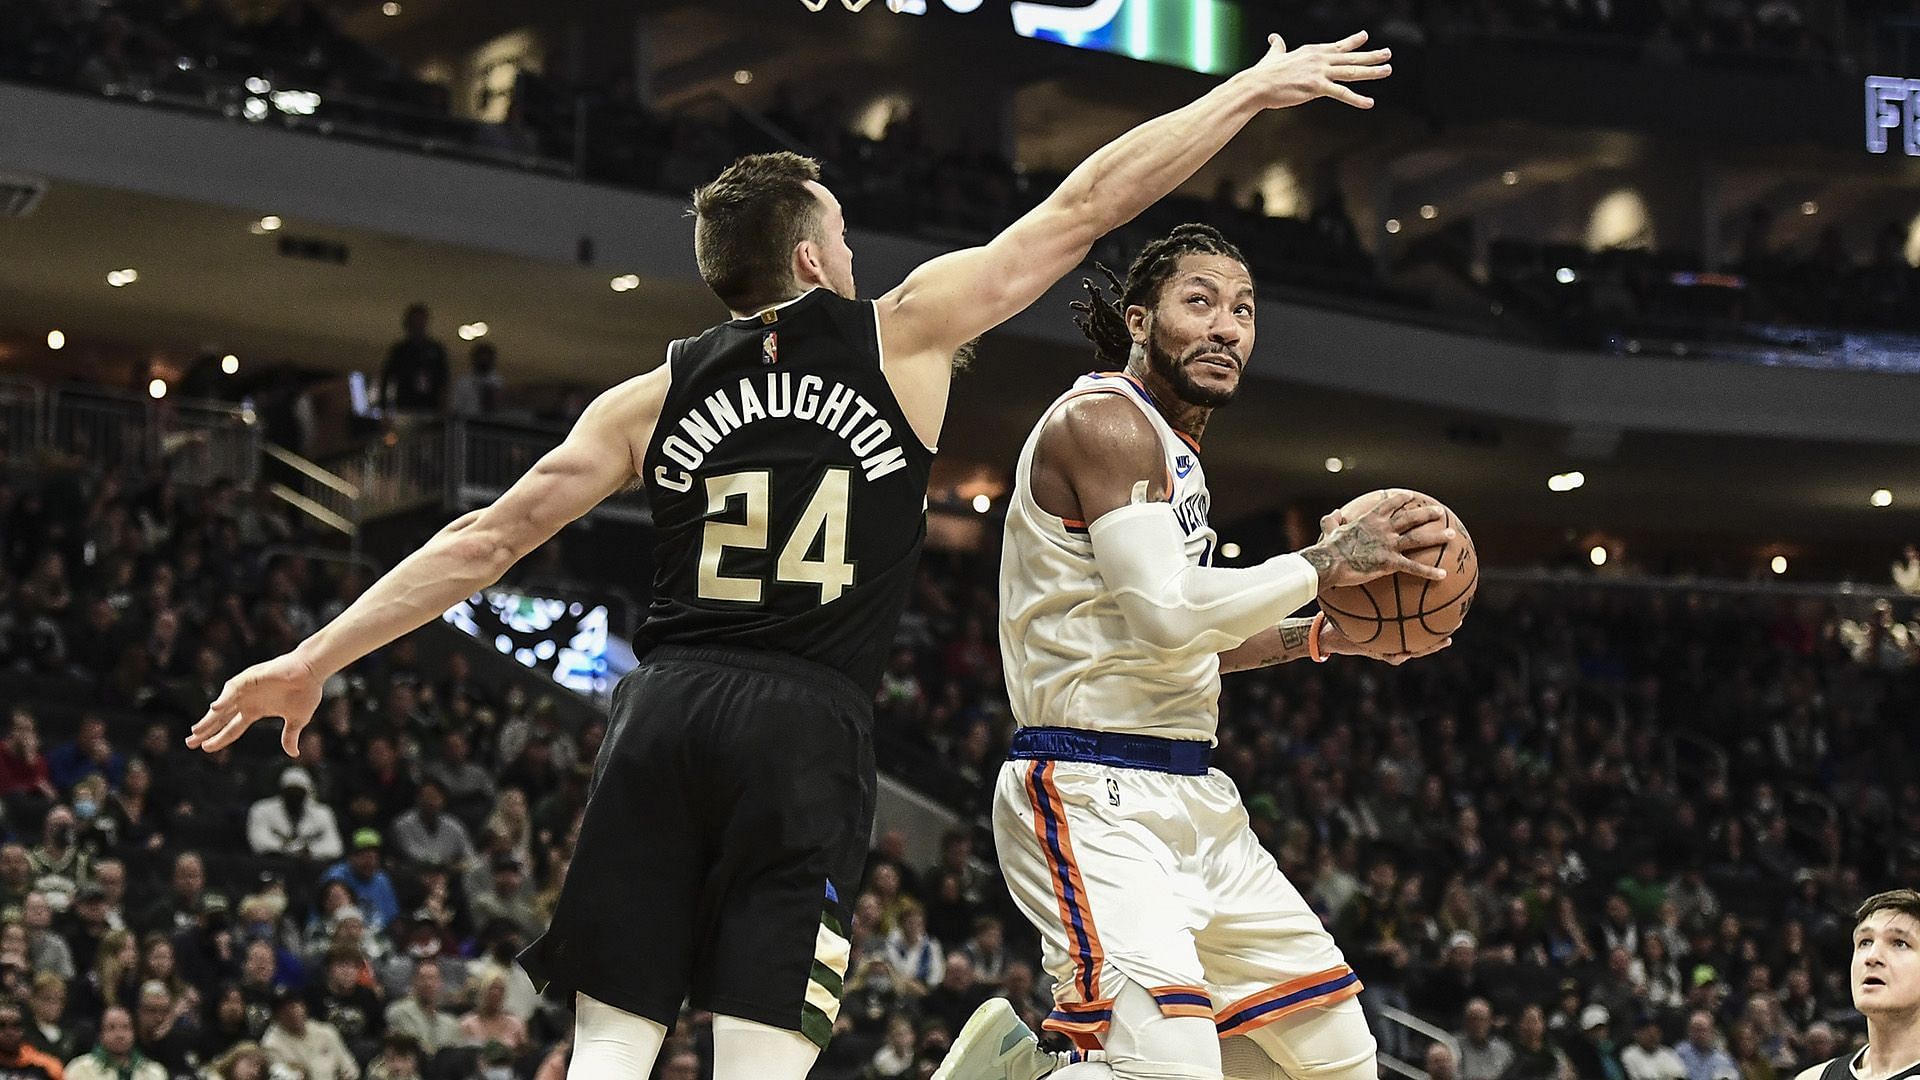 Derrick Rose led the New York Knicks&#039; mighty comeback the last time they played against the defending champions, Milwaukee Bucks, a few days ago [Photo: NBA.com]